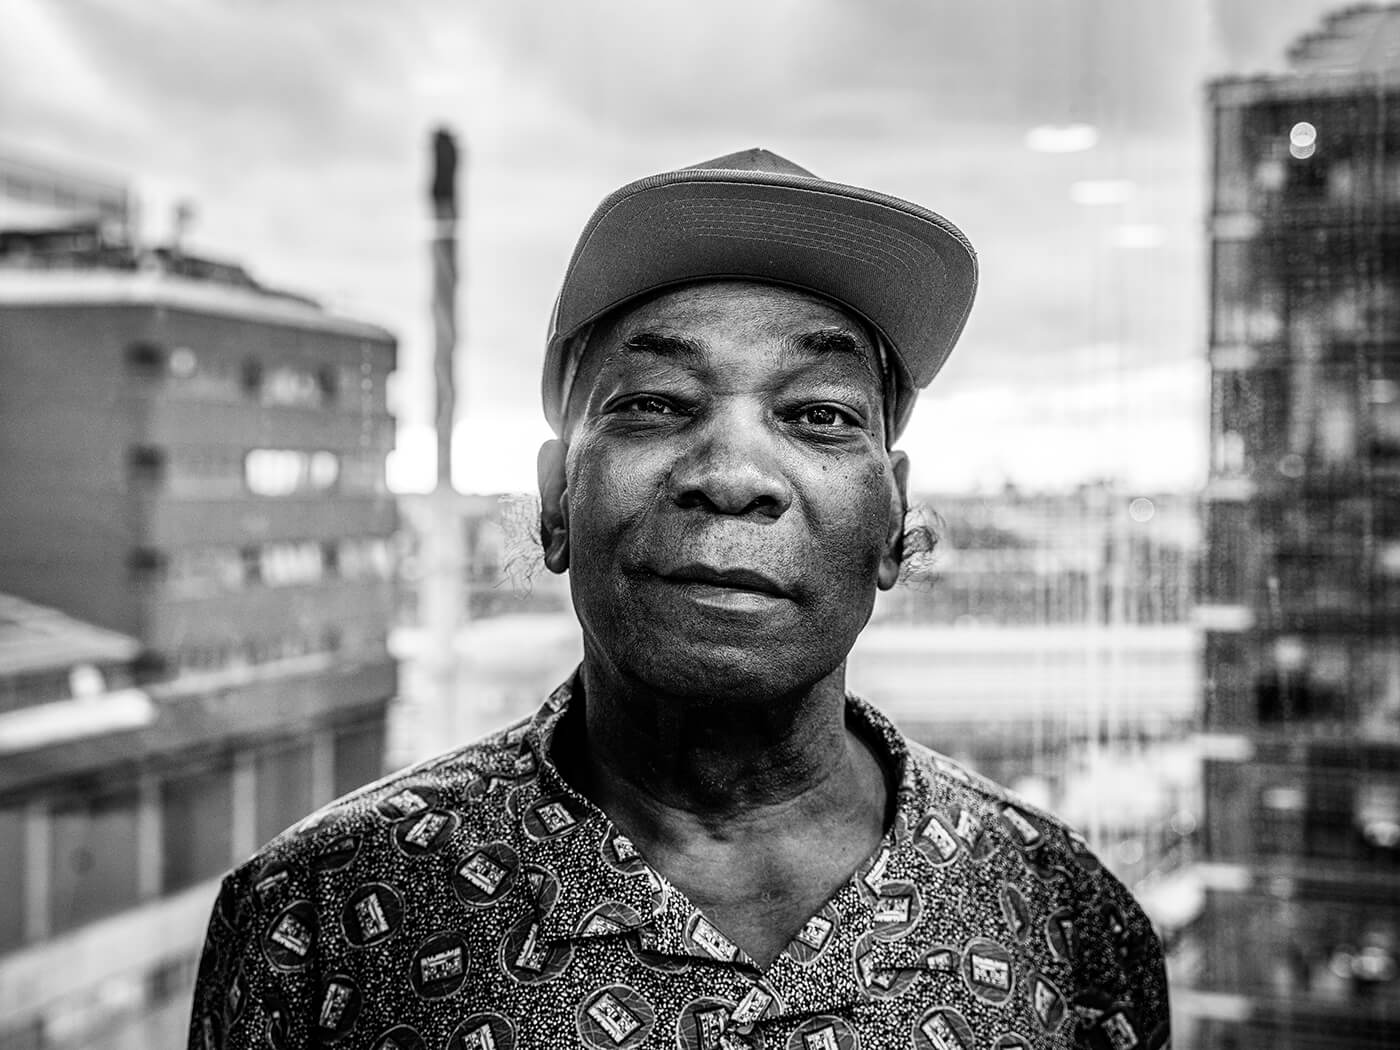 Dennis Bovell on his finest albums: “I have no problem calling the shots”